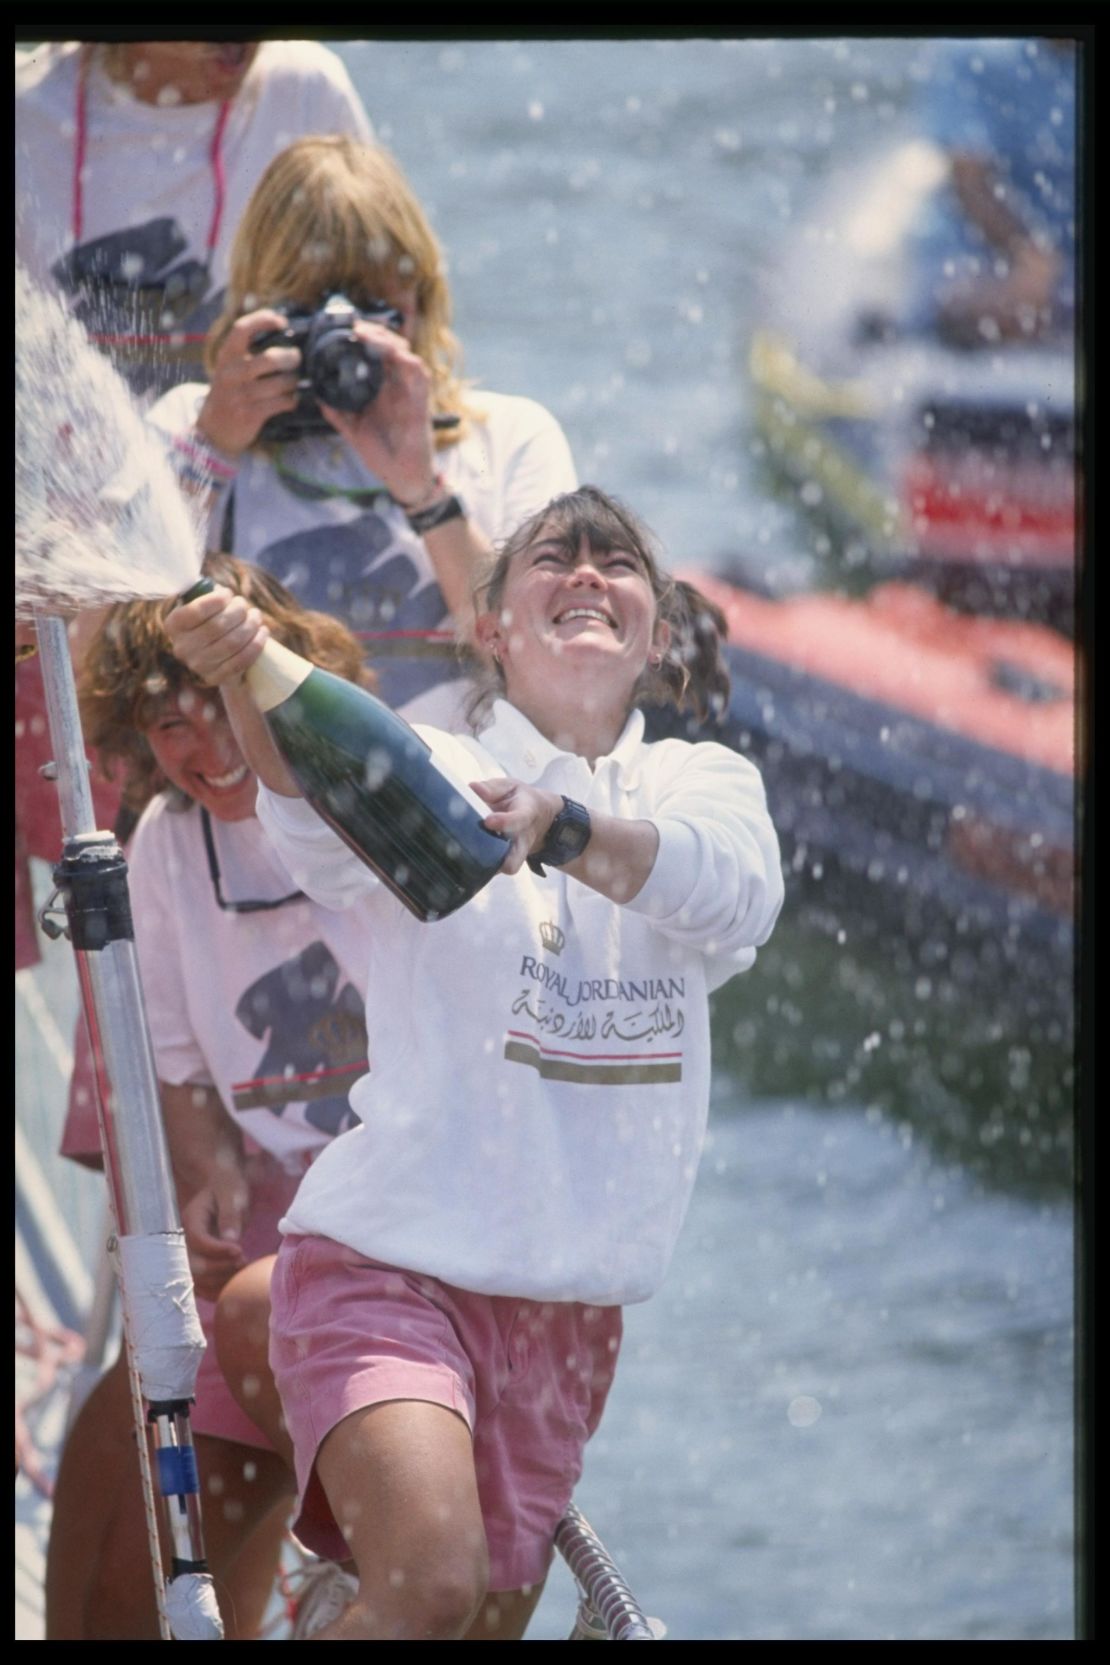 Tracy Edwards, skipper of Maiden, celebrates with champagne after finishing second during the Whitbread round the world yacht race in 1990.